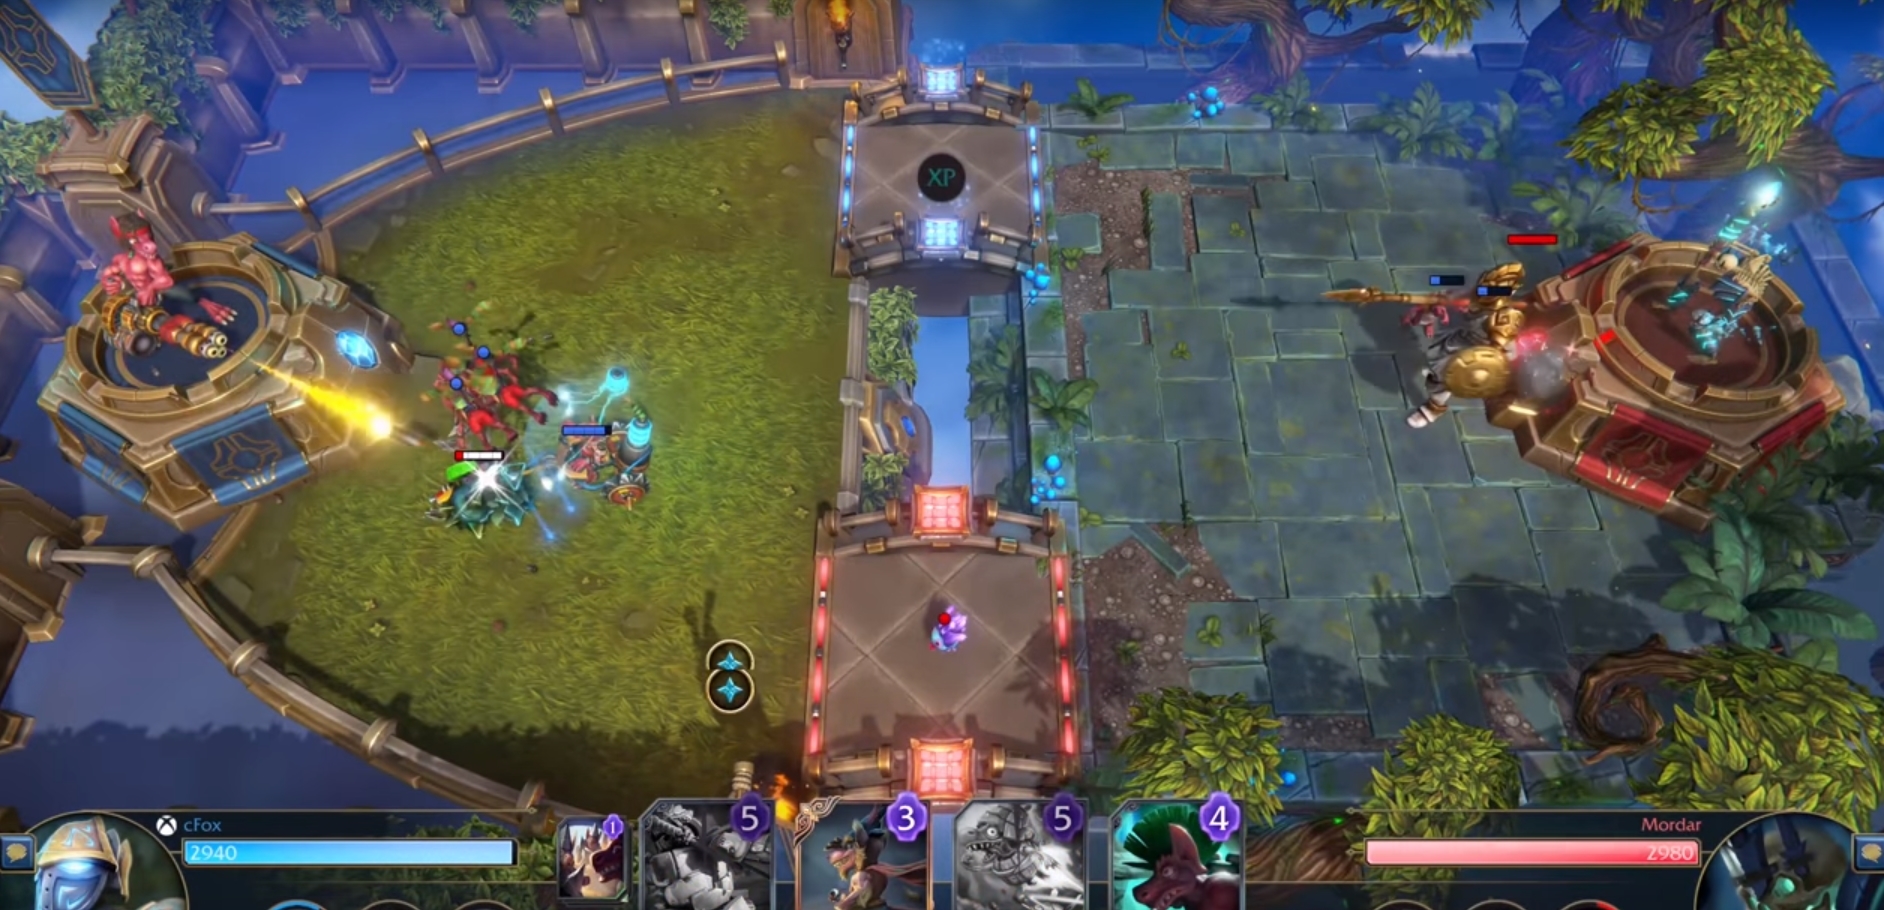 Minion Masters Announces New Saving Jadespark Jungle Expansion, Coming In February 2020